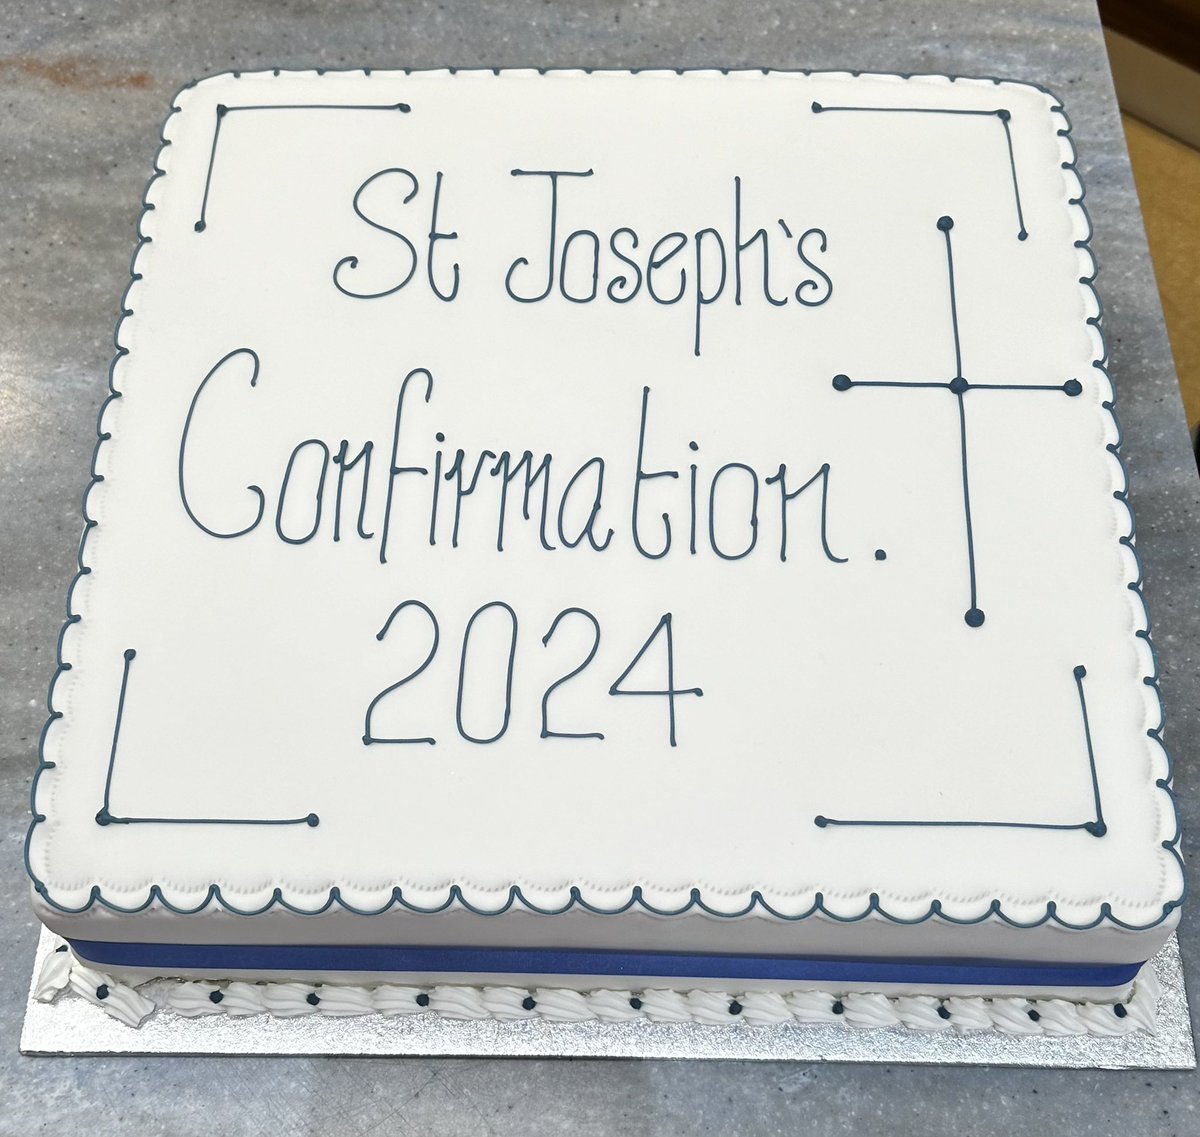 Congratulations to our Primary 7 pupils who made their Confirmation last Friday in St. Patrick’s Church. Thank you to Fr. Dermot and Fr. Eamon for a beautiful service. The children showed great reverence and respect throughout #confirmation #stjosephsfamily #community